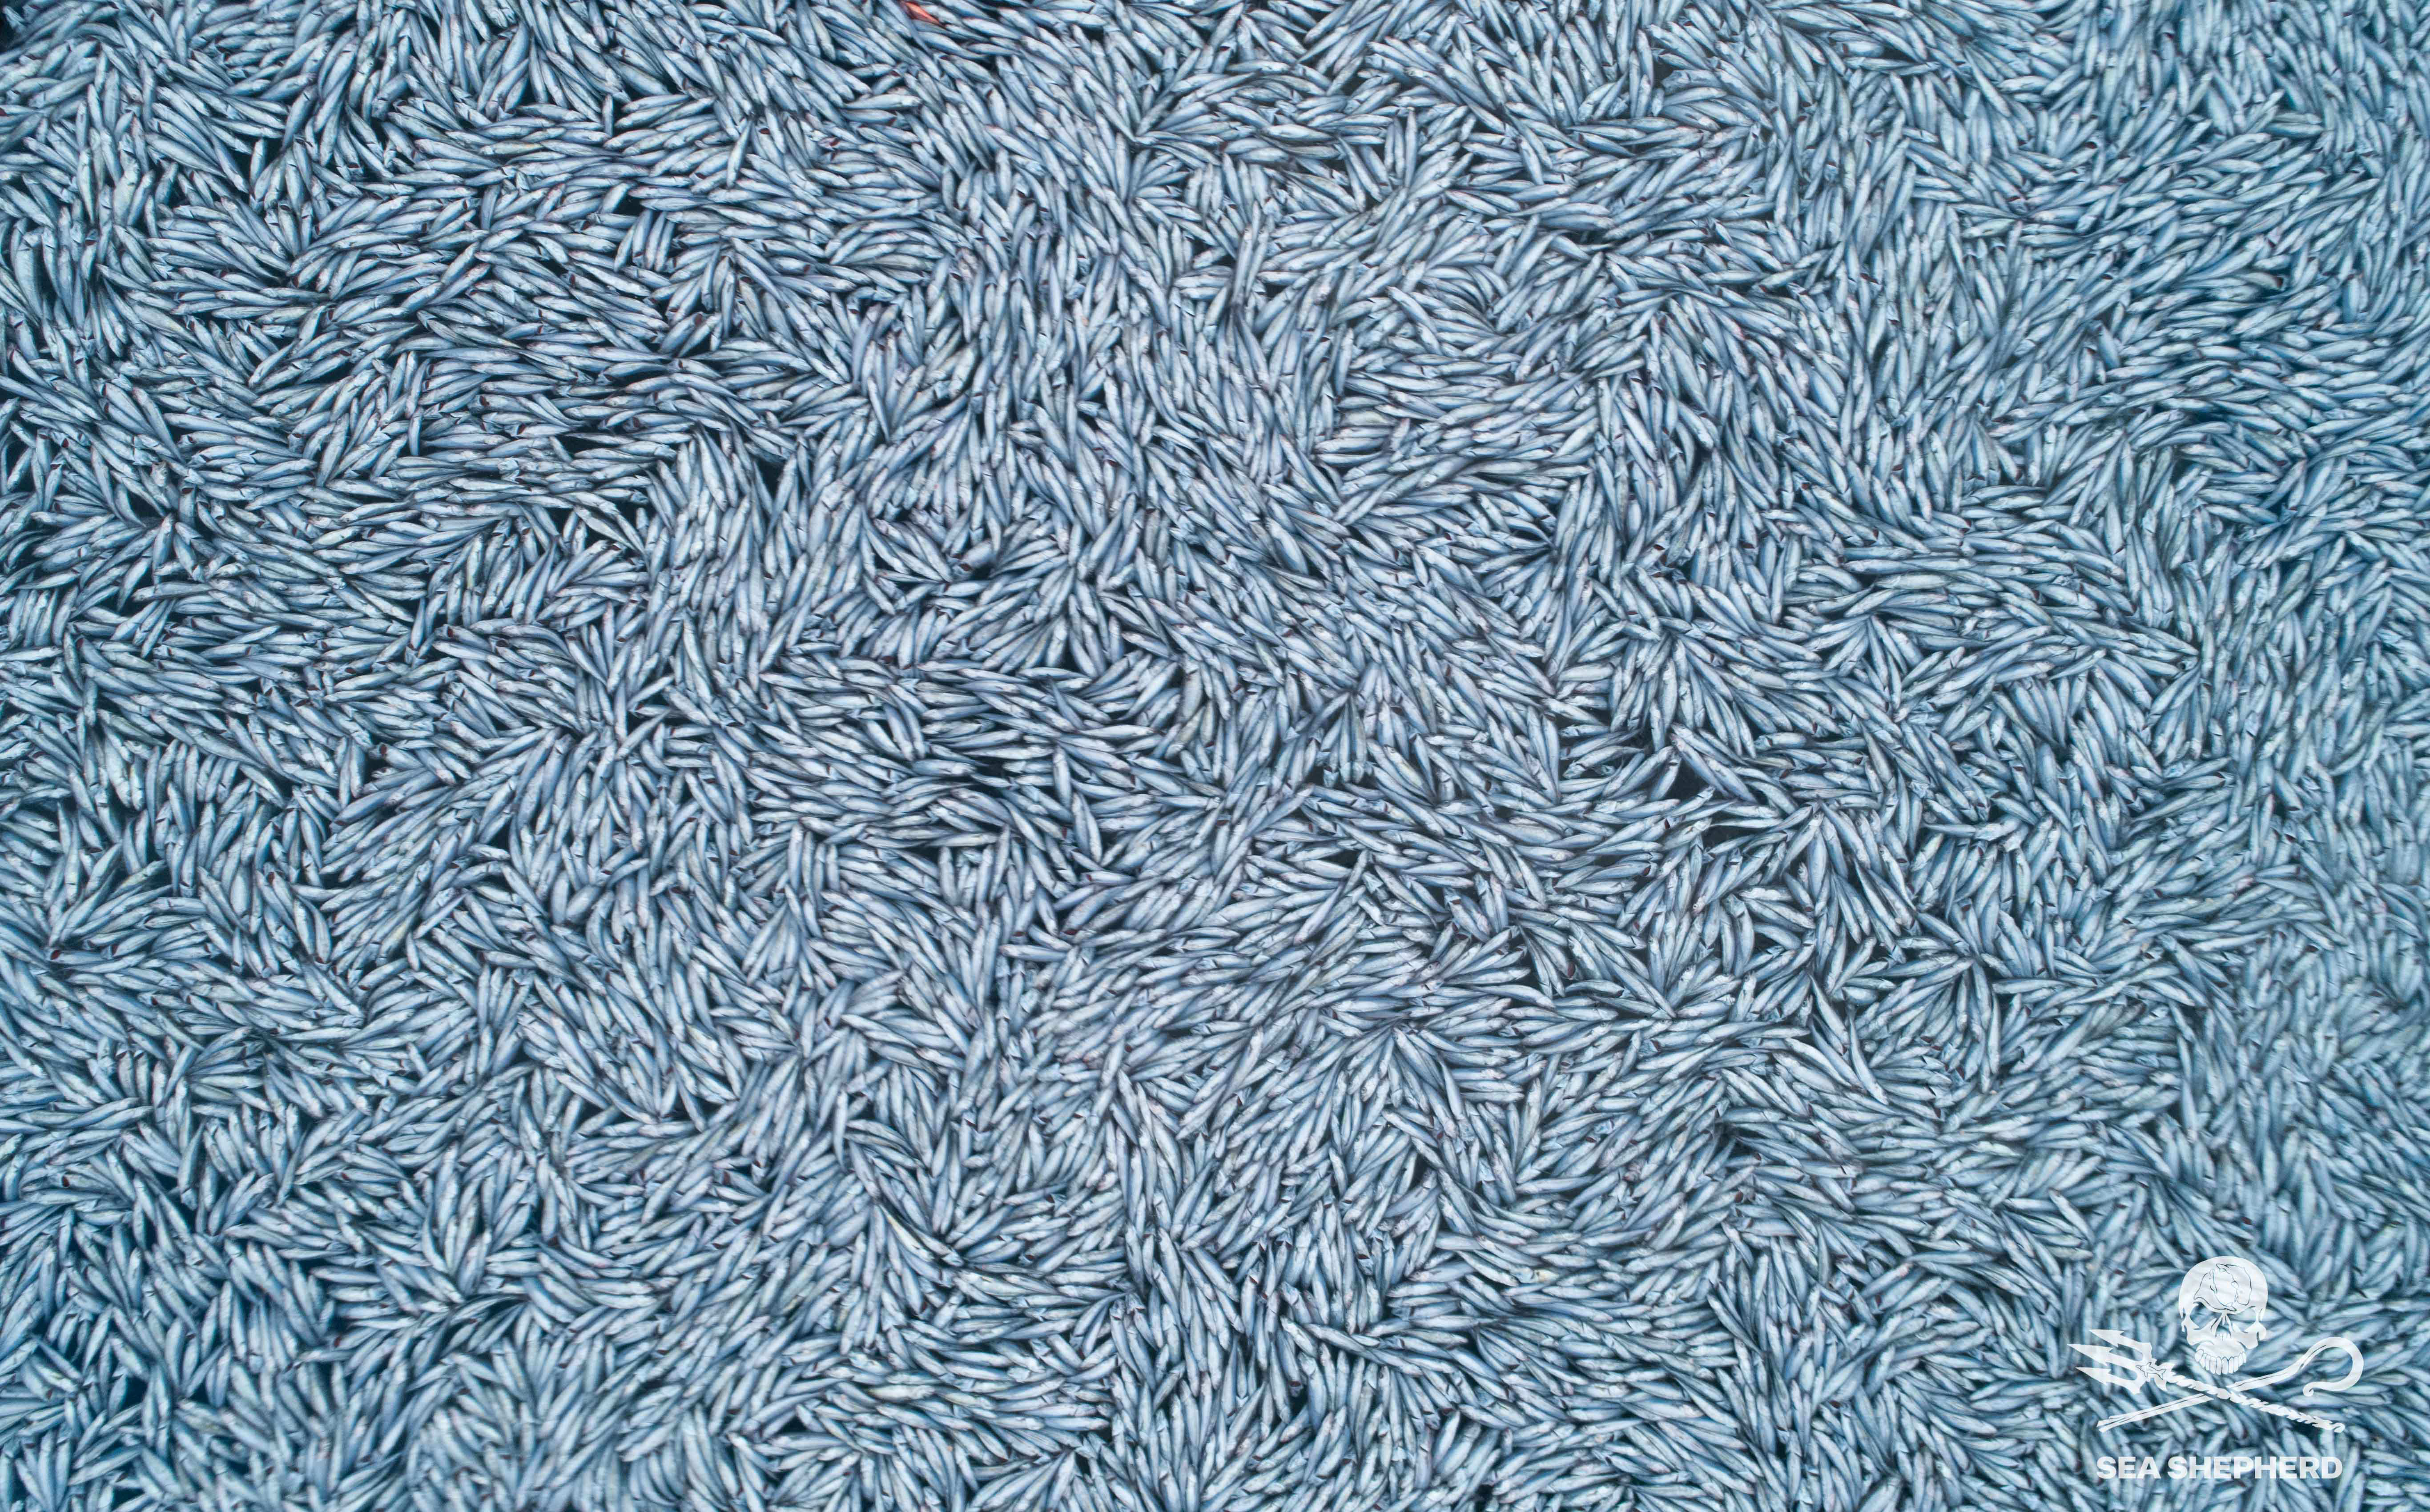 Some of the 100,000 dead blue whiting fish off the coast of La Rochelle, western France, seen on 3 February, 2022.